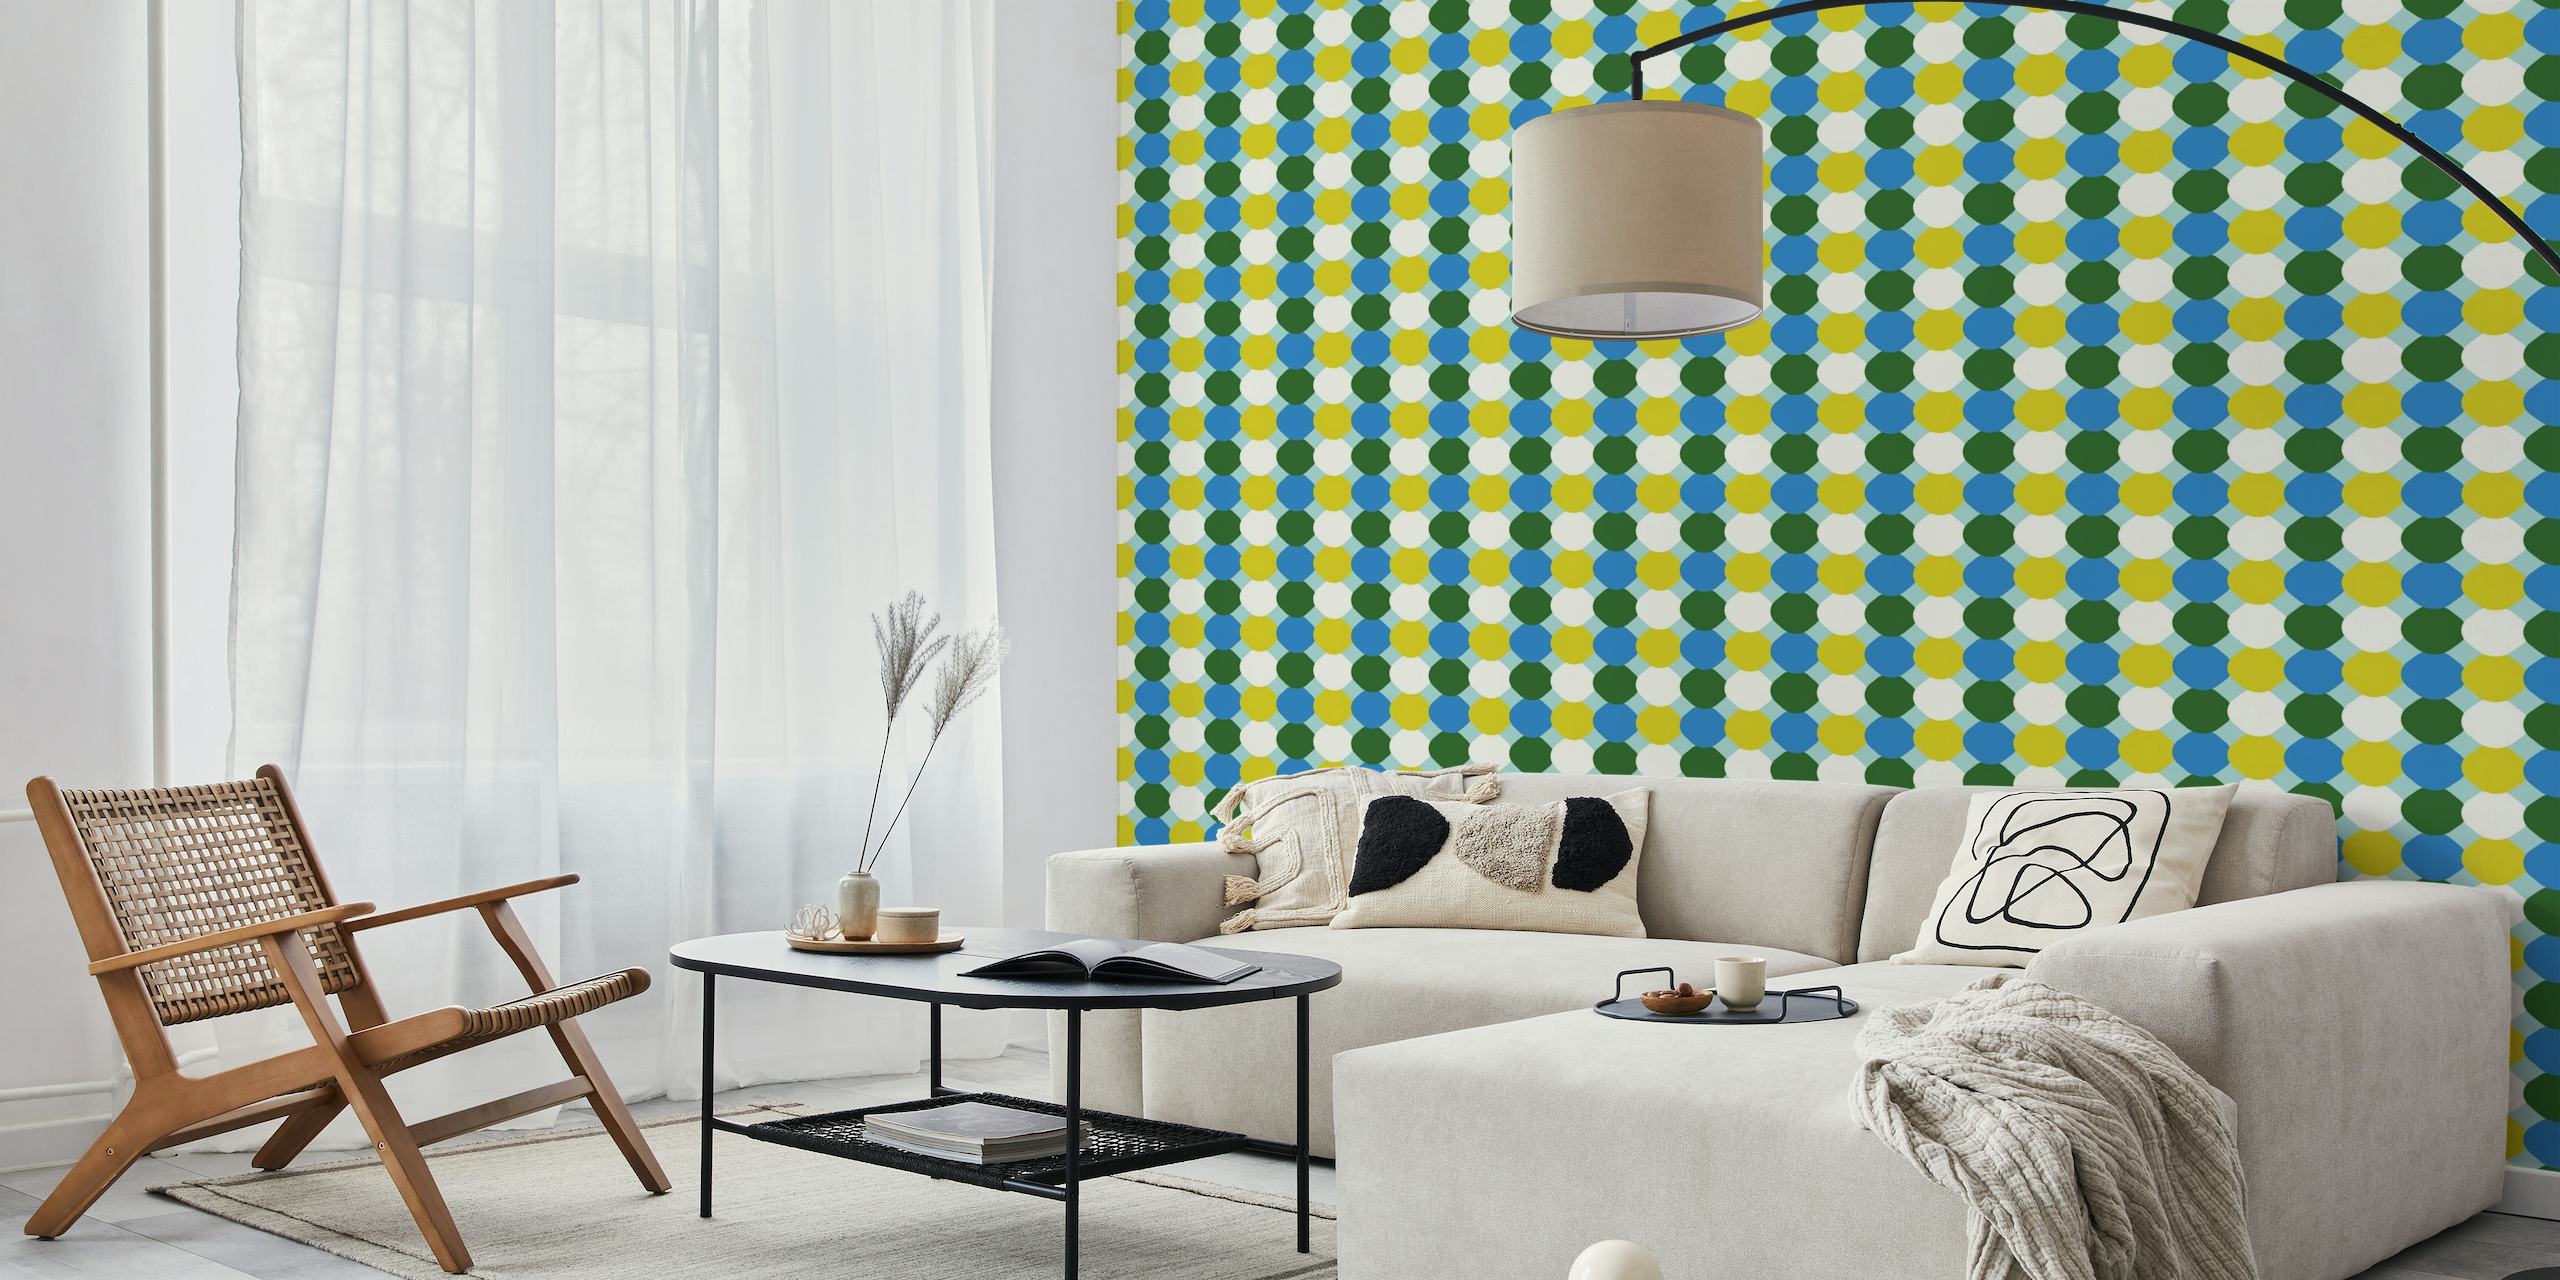 Retro style wall mural with pattern of mint, green, and blue tiles.